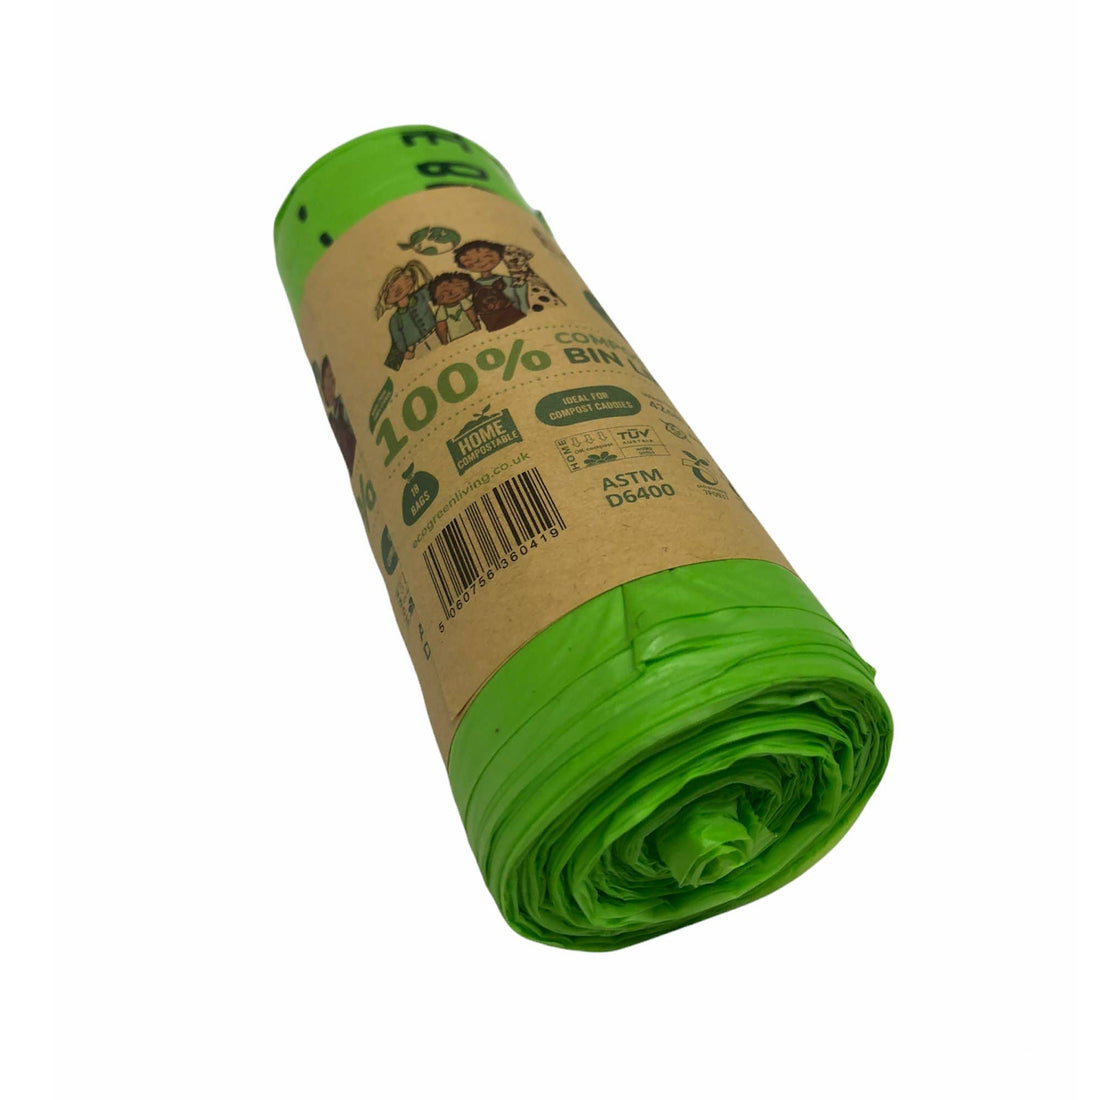 10L Compostable Waste Bags - 18 Bags